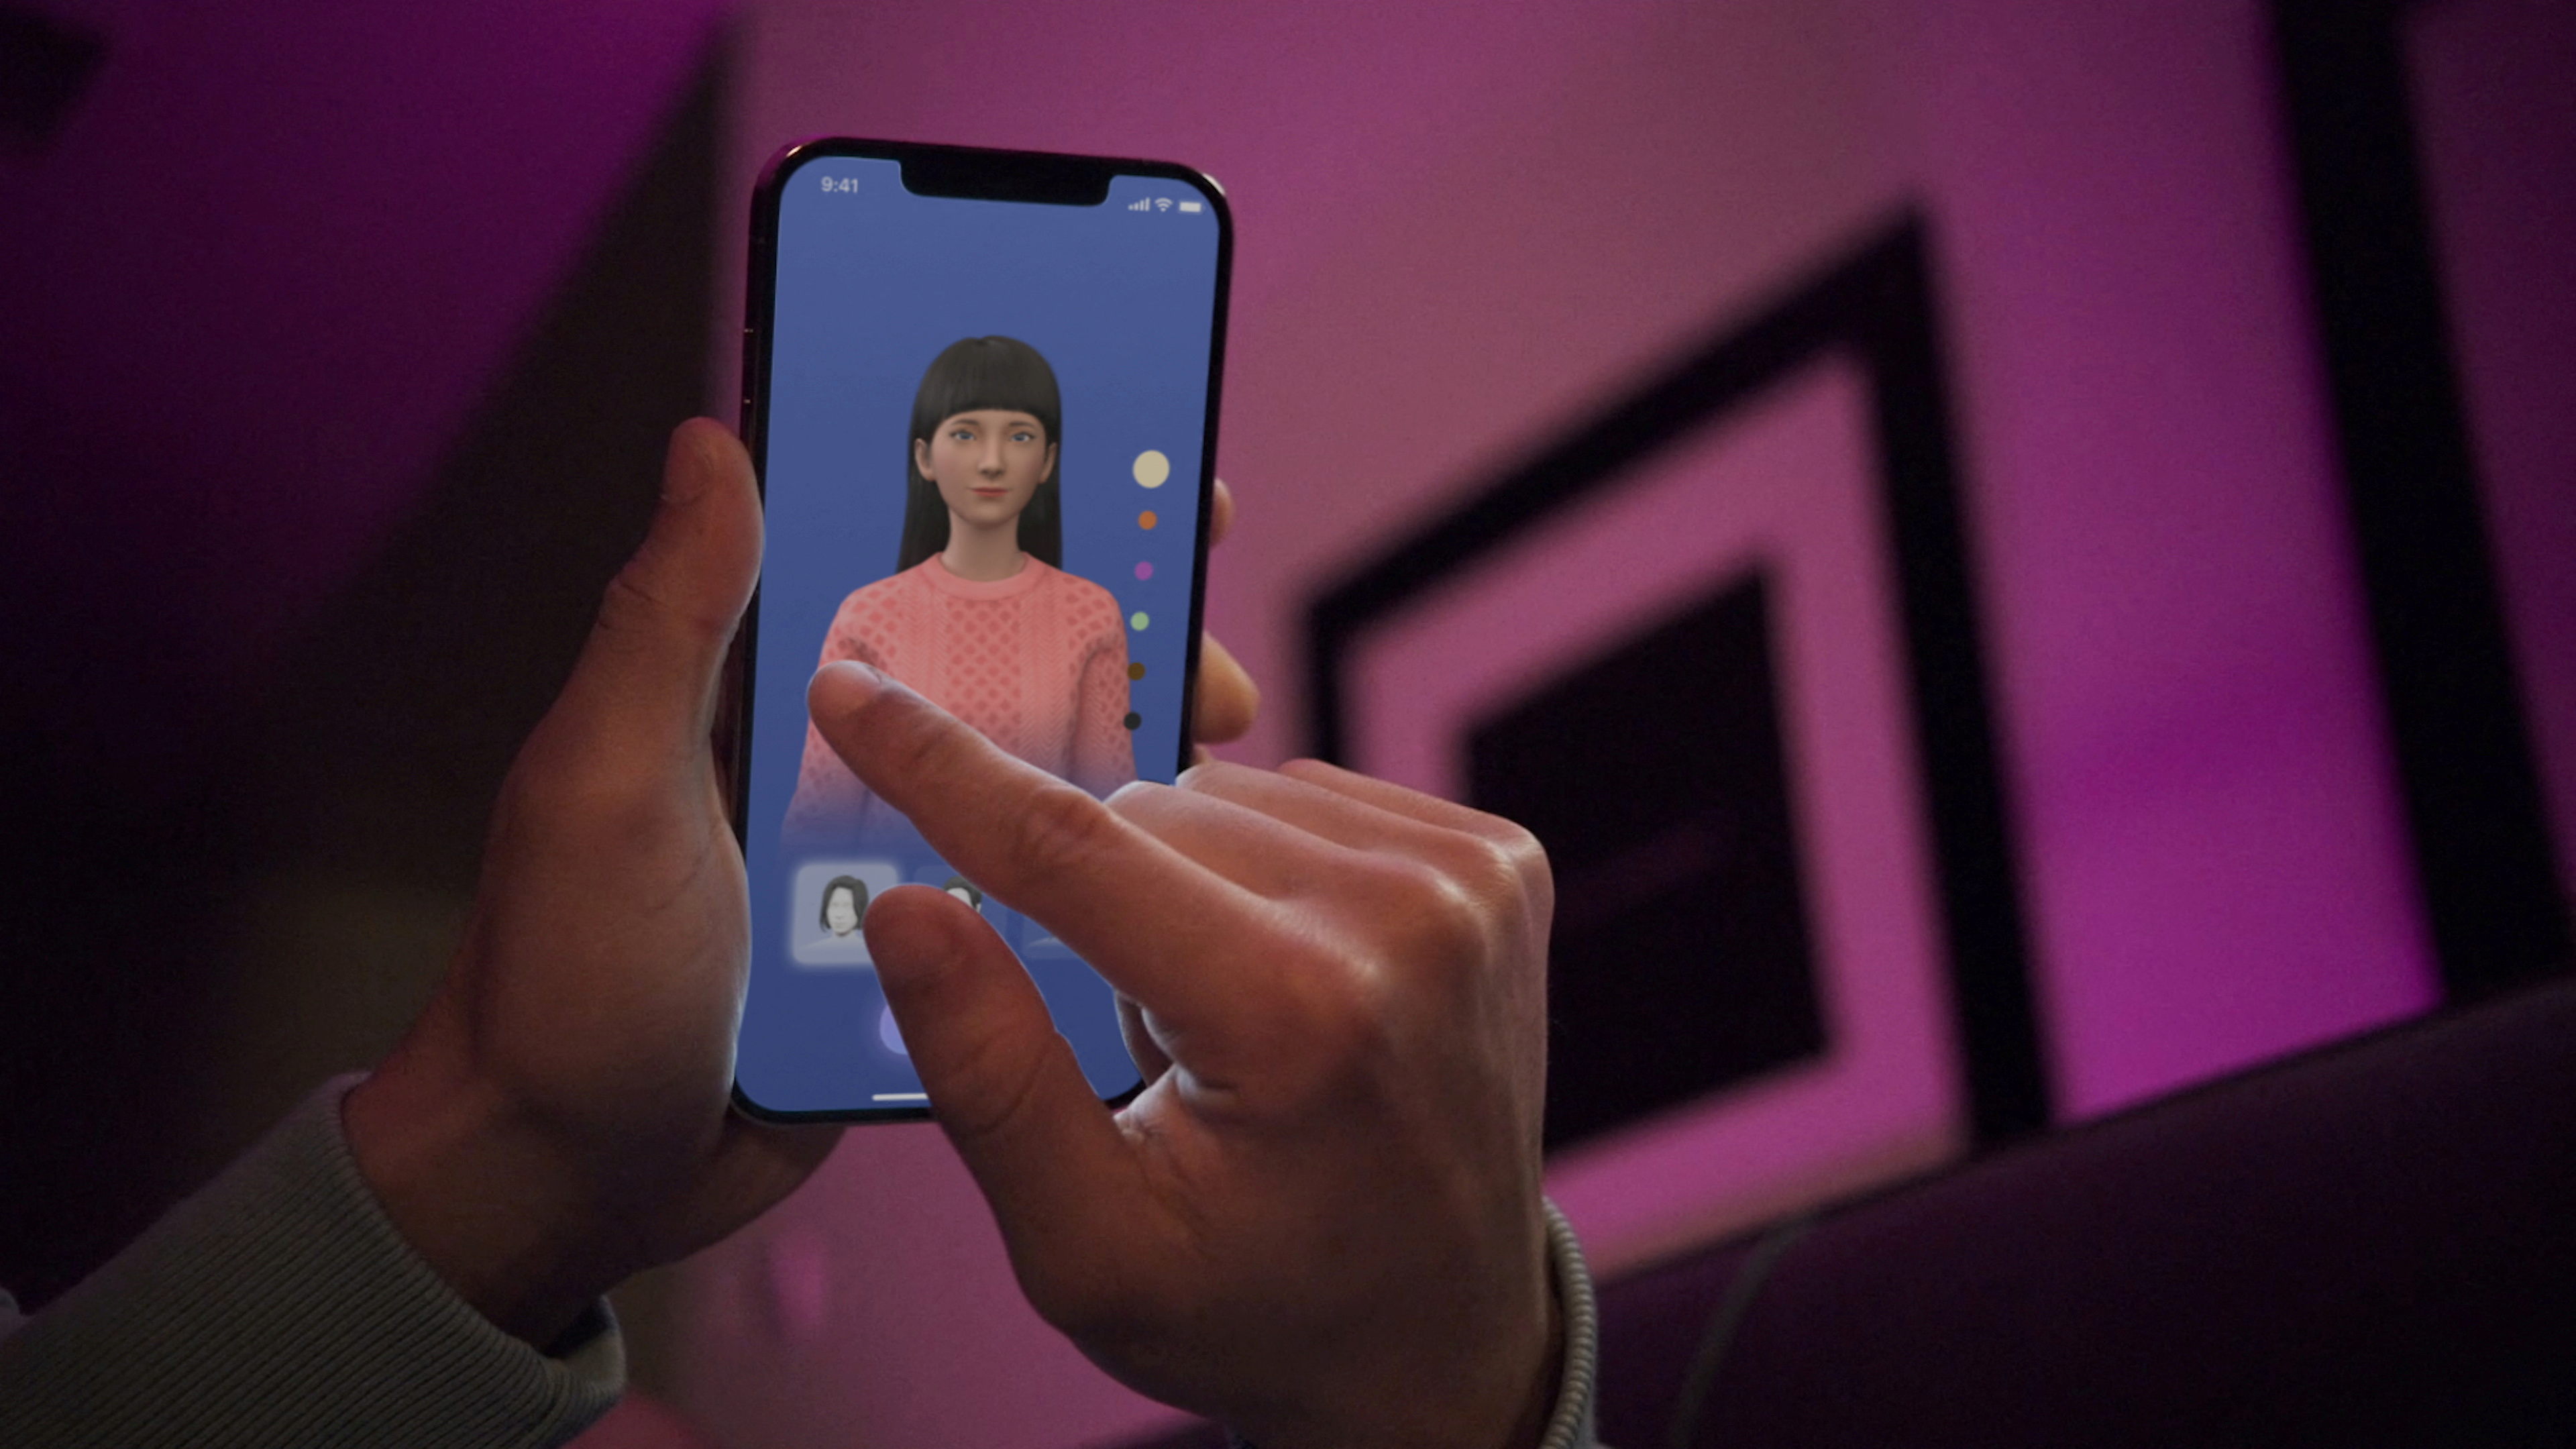 FILE PHOTO: US startup Replika shows a user interacting with a smartphone app to customize an avatar for a personal AI chatbot (Reuters)